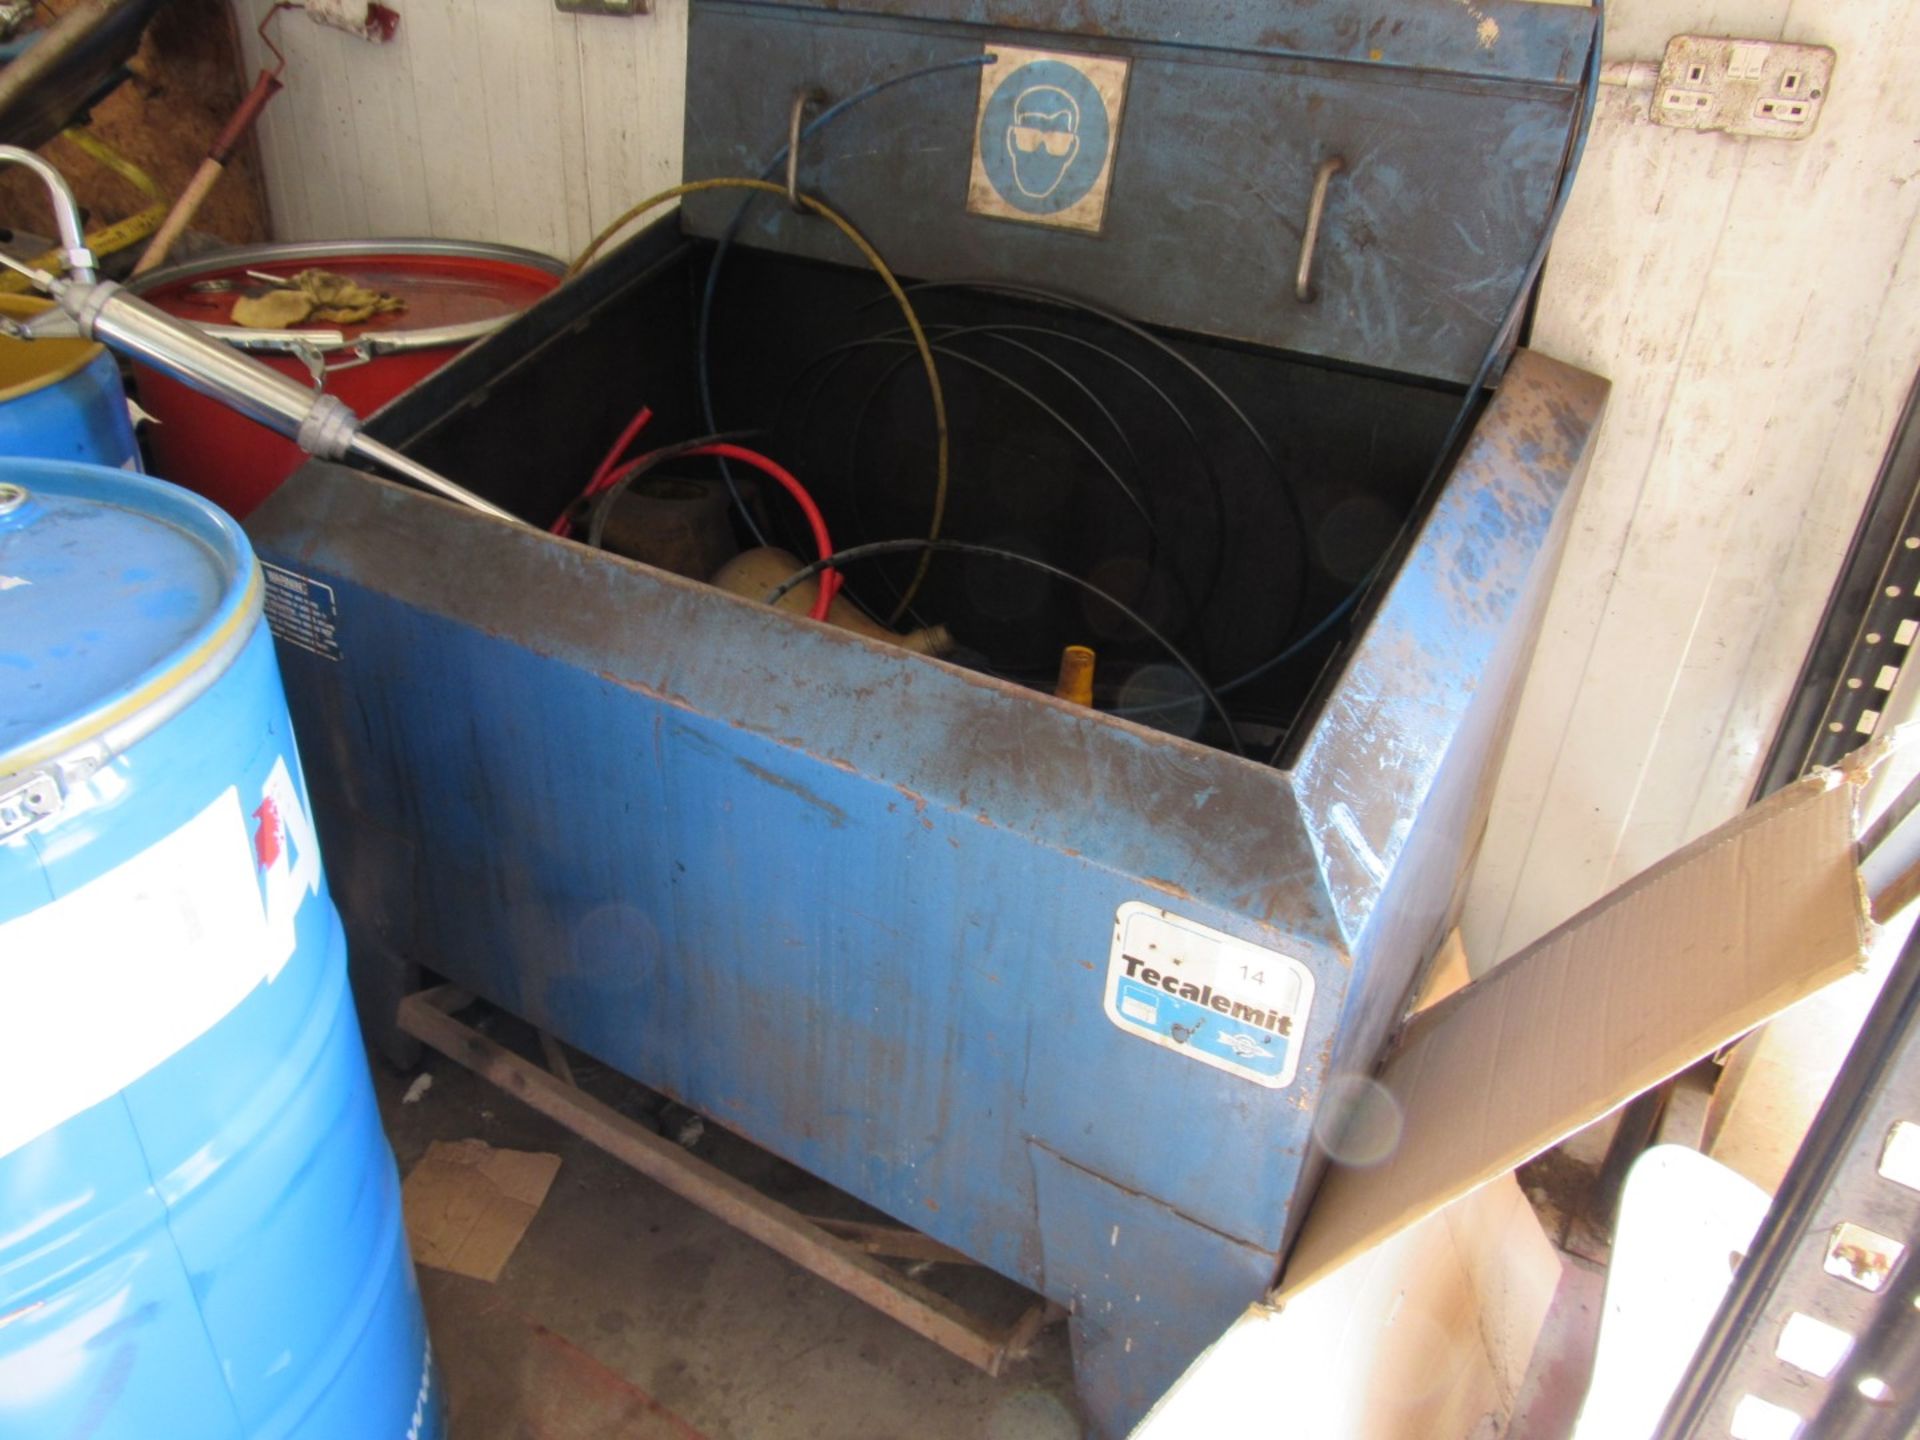 Tecalemit treadle operated degreasing tank - Image 2 of 2